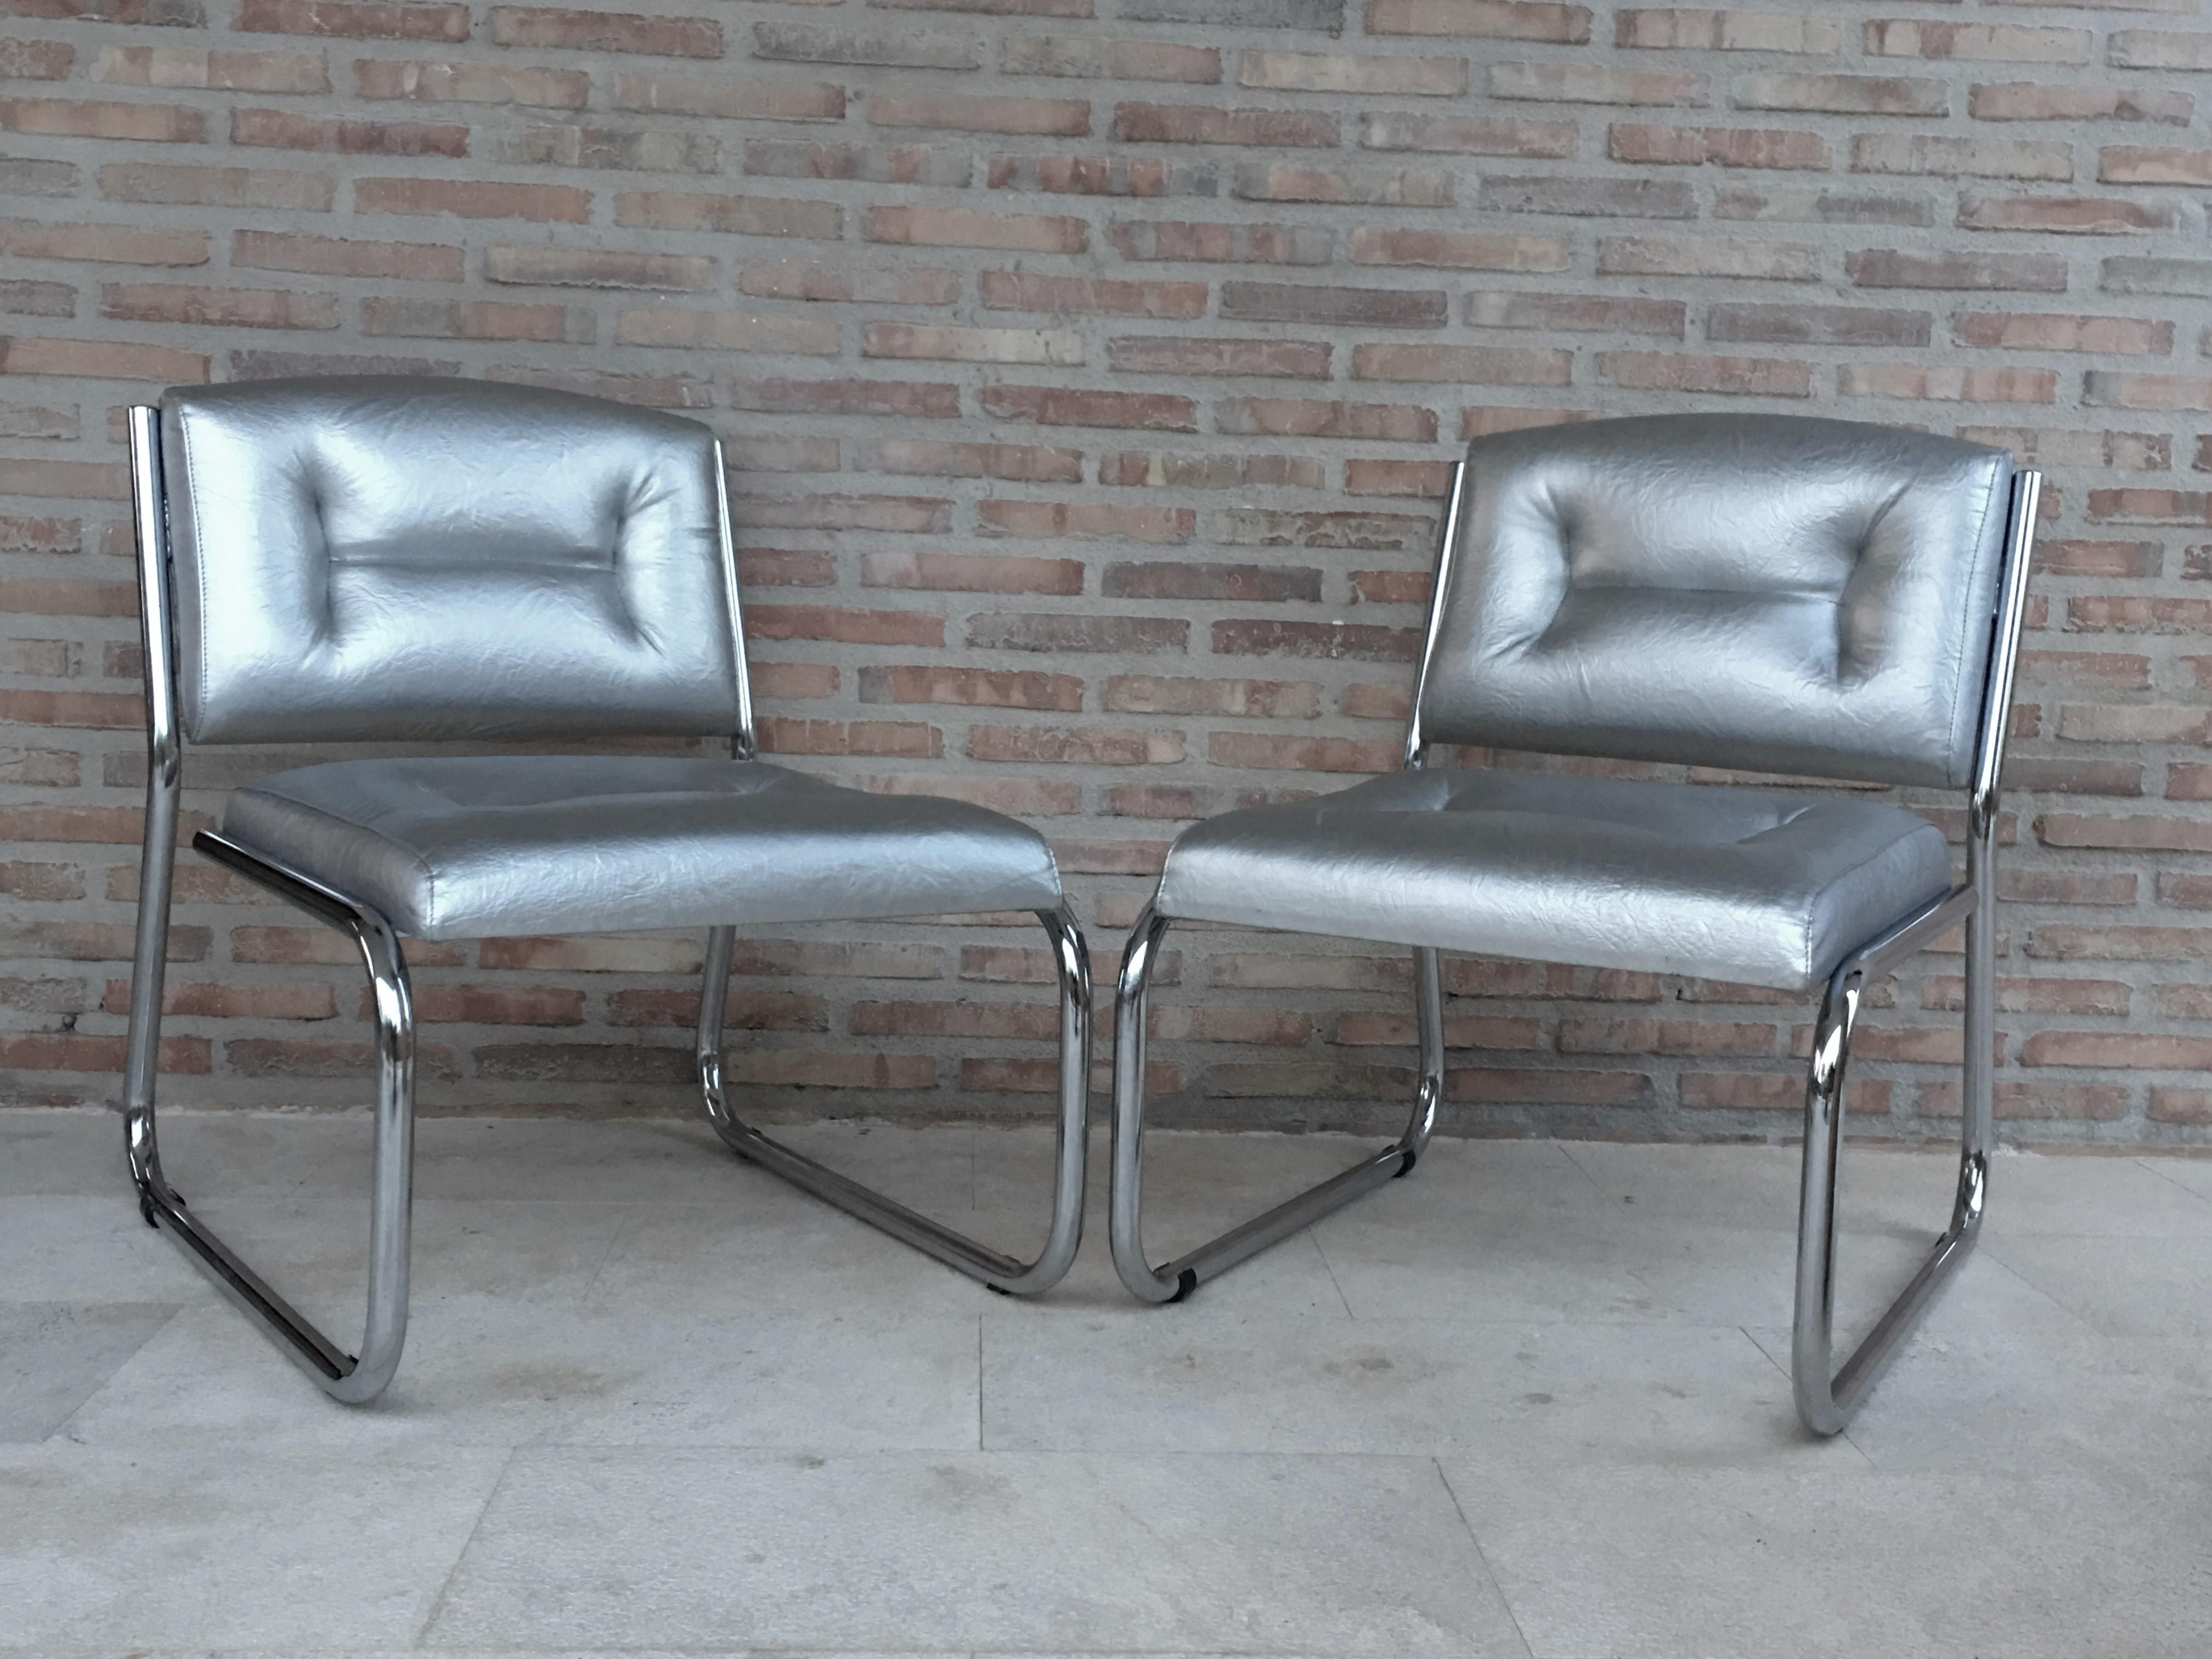 Mid-Century Modern Pair of Art Deco Tubular Chrome Lounge Chairs in Silver Faux Leather For Sale